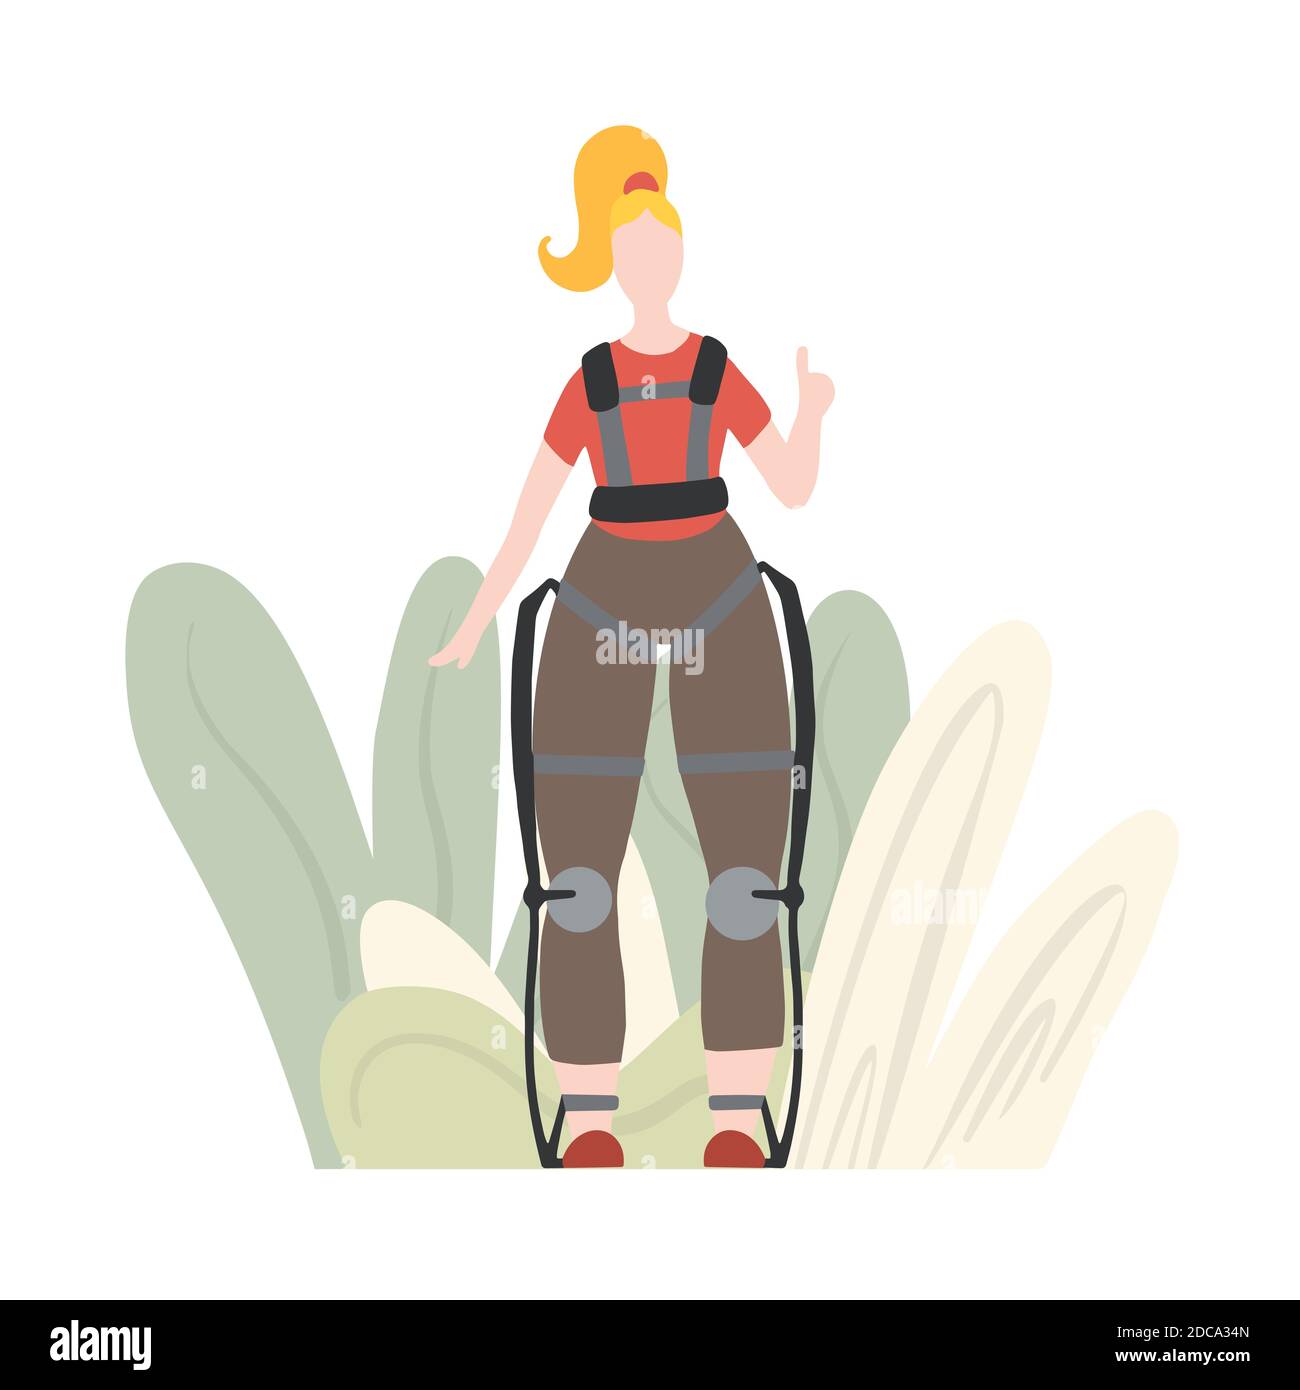 Illustration of white woman in exosuit with abstract foliage. Medical exoskeleton to help people with disabilities. Innovation in healthcare. Vector i Stock Vector